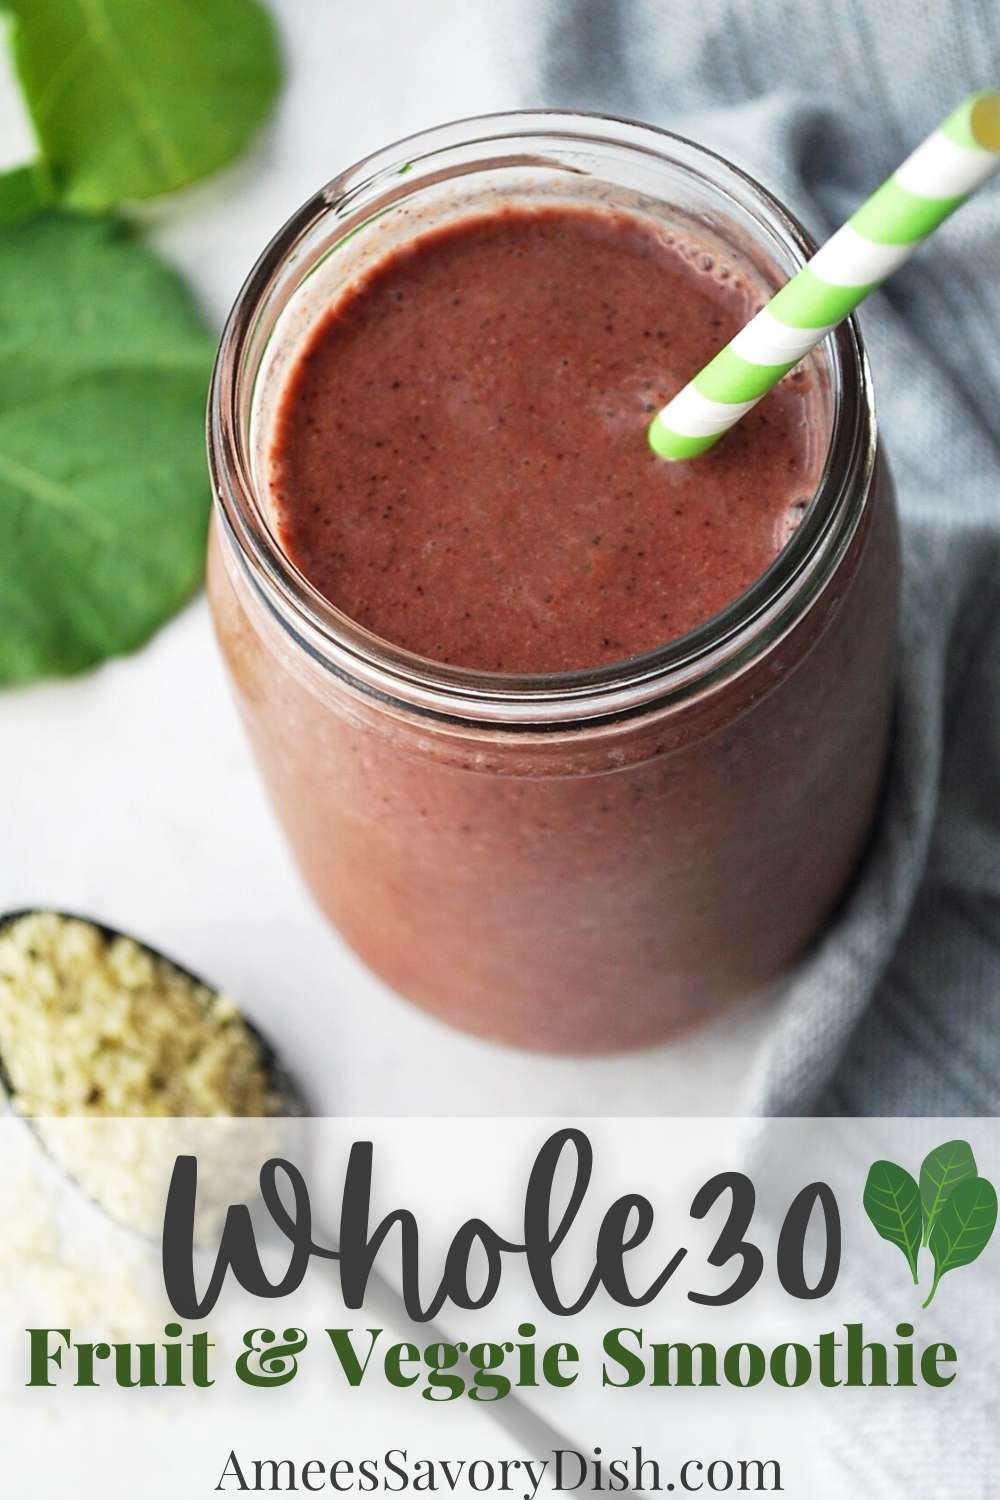 This easy fruit and veggie smoothie made with baby kale, a fresh carrot, frozen berries, almond butter, and hemp seeds is a great way to pack nutrition into your morning meal. Vegan and Whole30 approved. via @Ameessavorydish